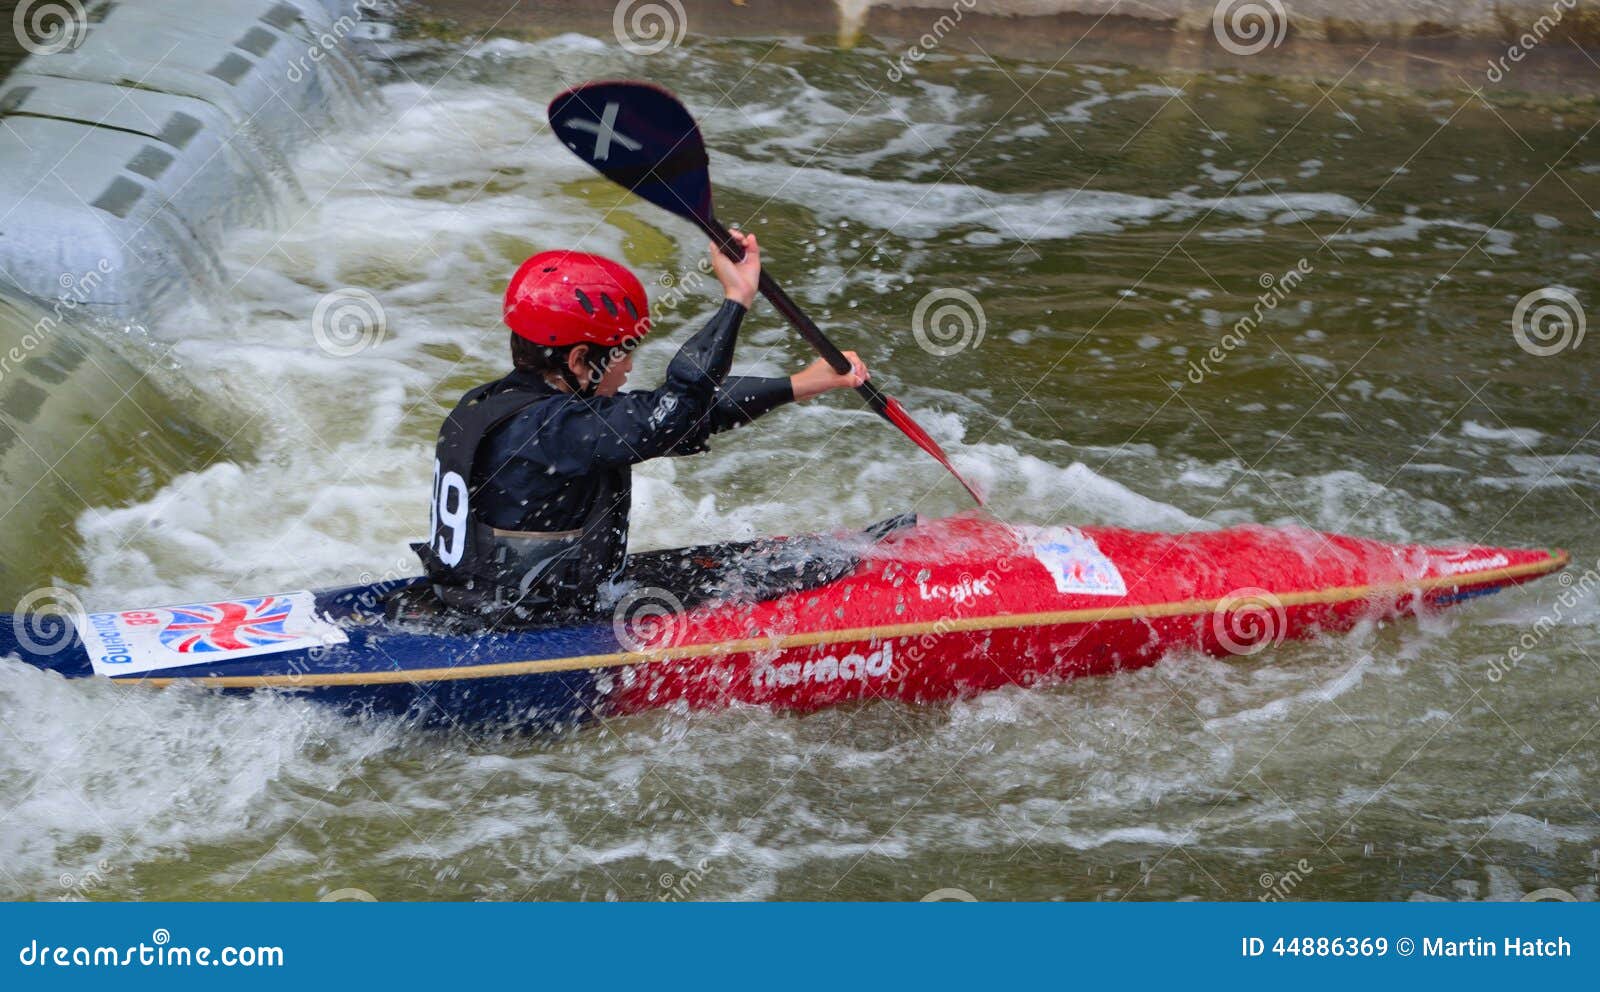 Bedford, Bedfordshire, England - August 31, 2014:Young Competitor in competition at Bedford Viking Kayak Club Cardington Slalom Course.